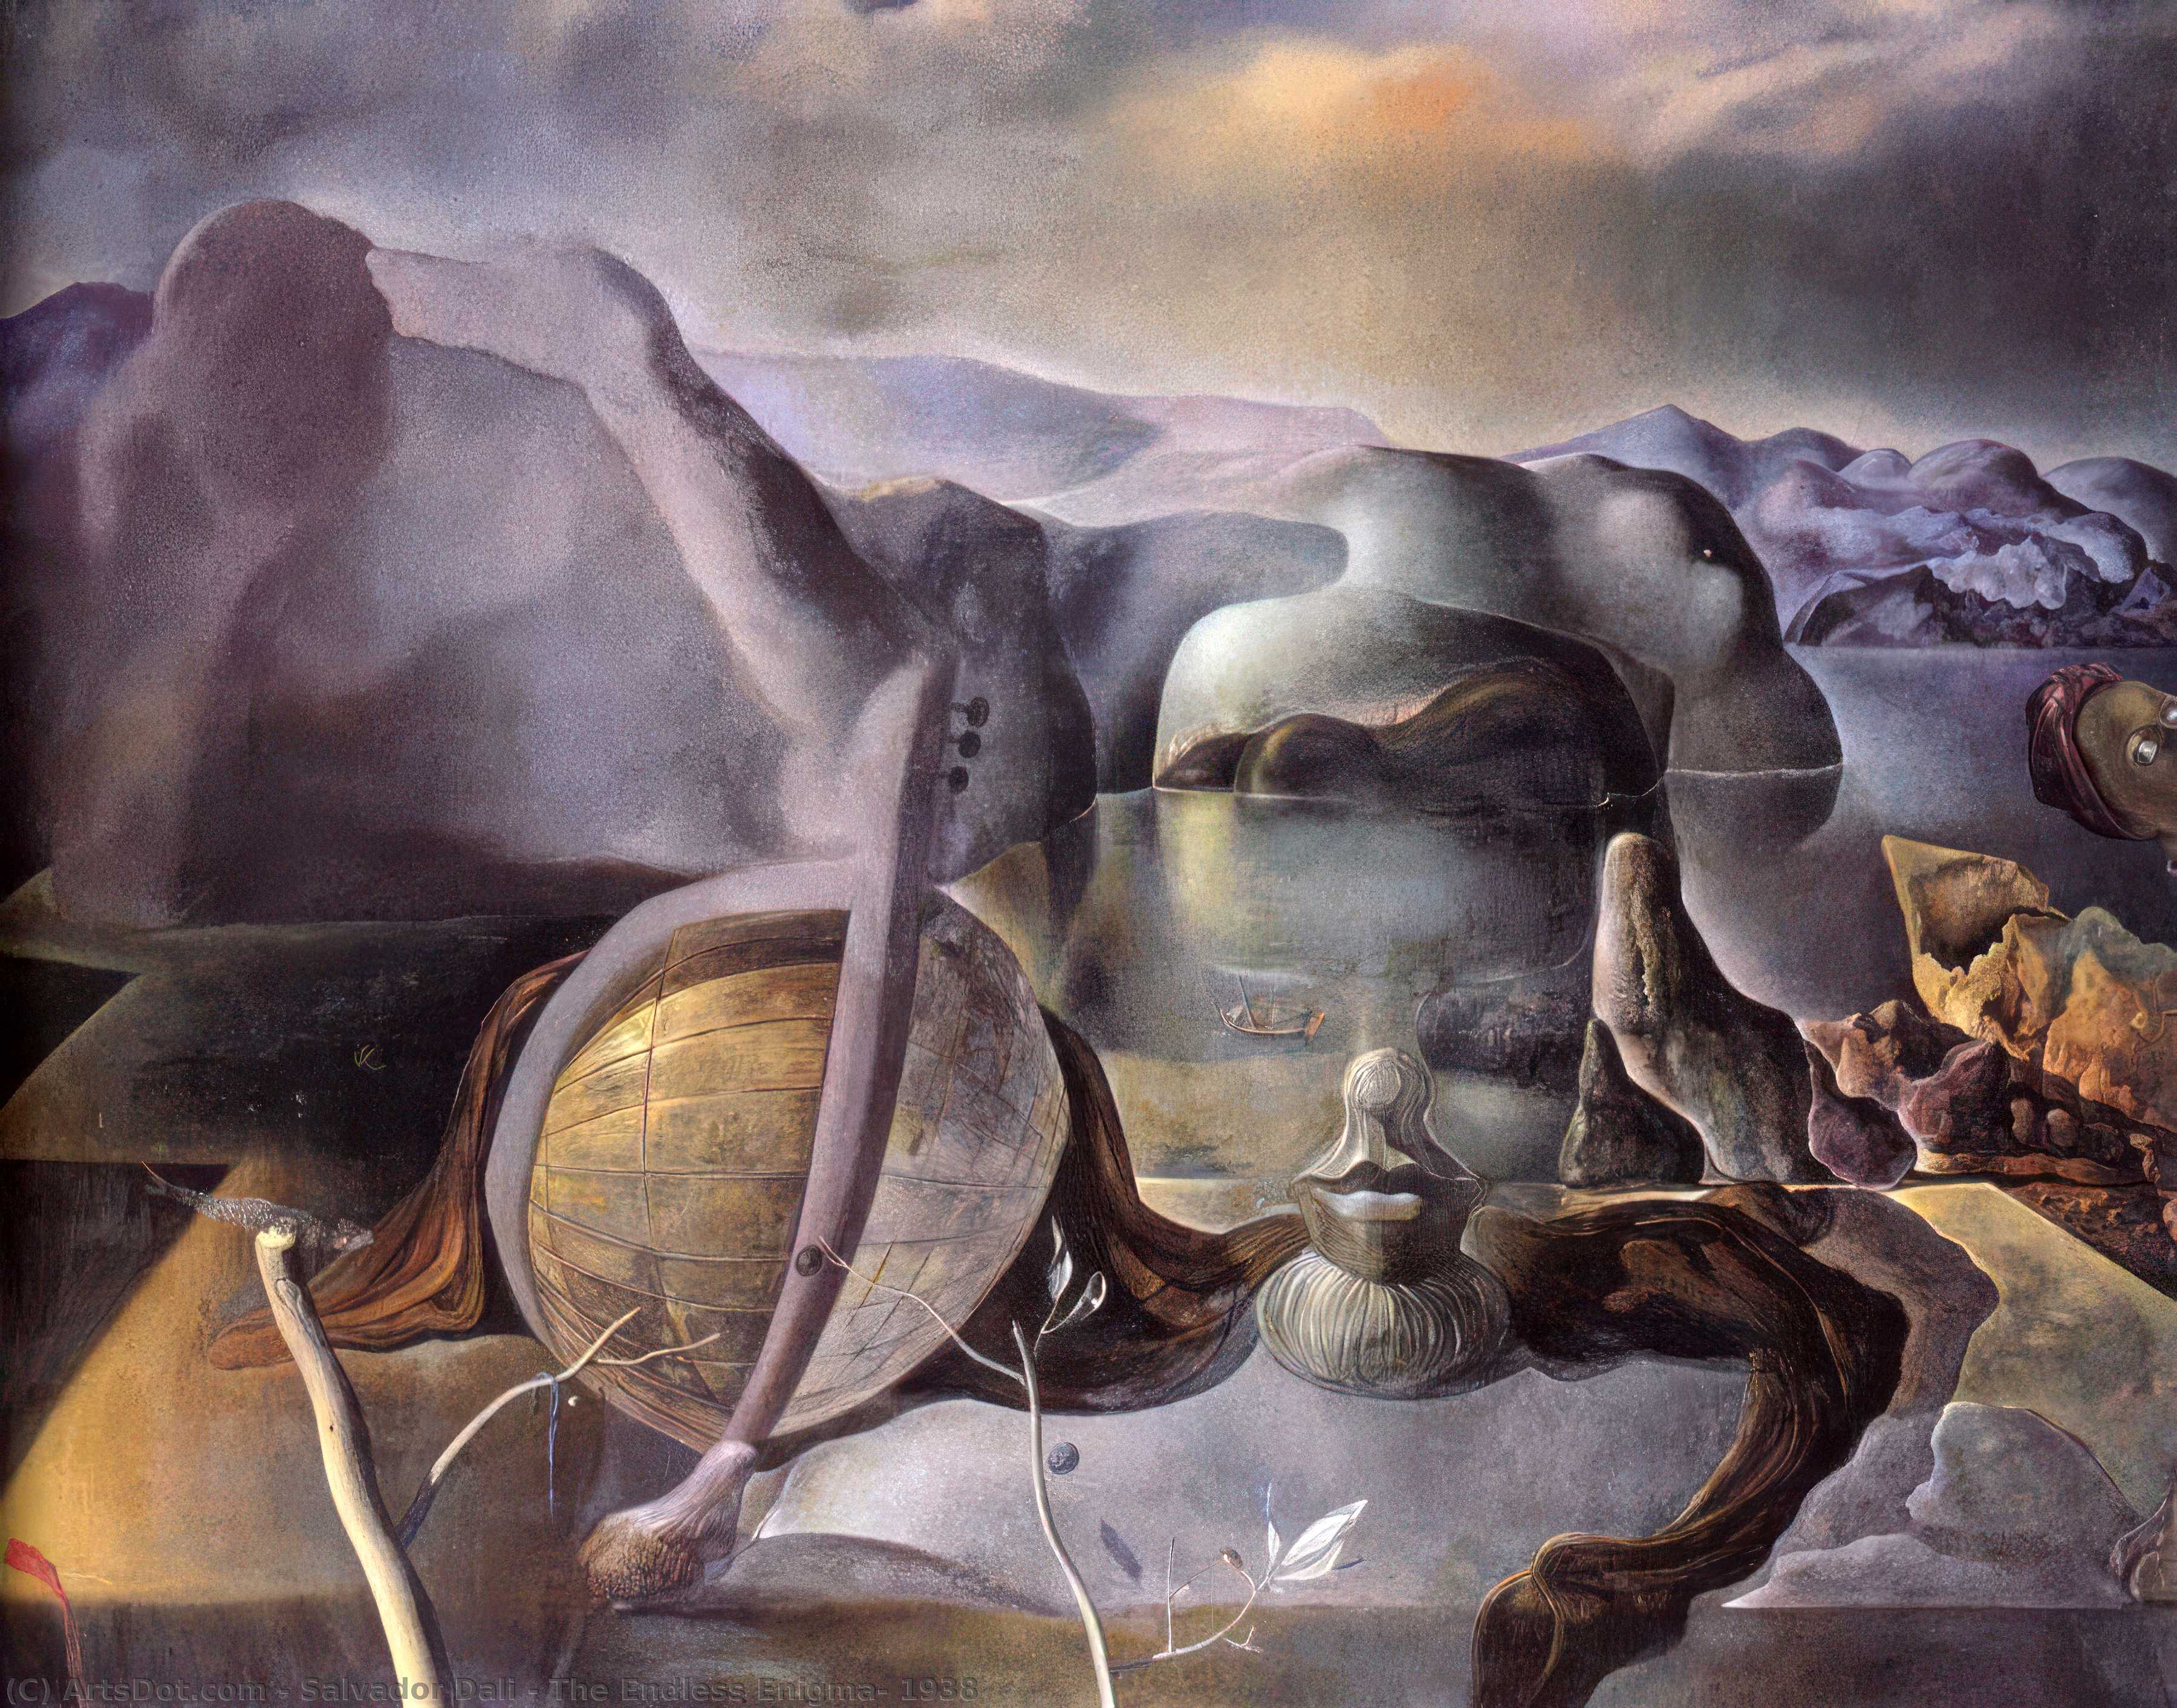  Art Reproductions The Endless Enigma, 1938, 1938 by Salvador Dali (Inspired By) (1904-1989, Spain) | ArtsDot.com